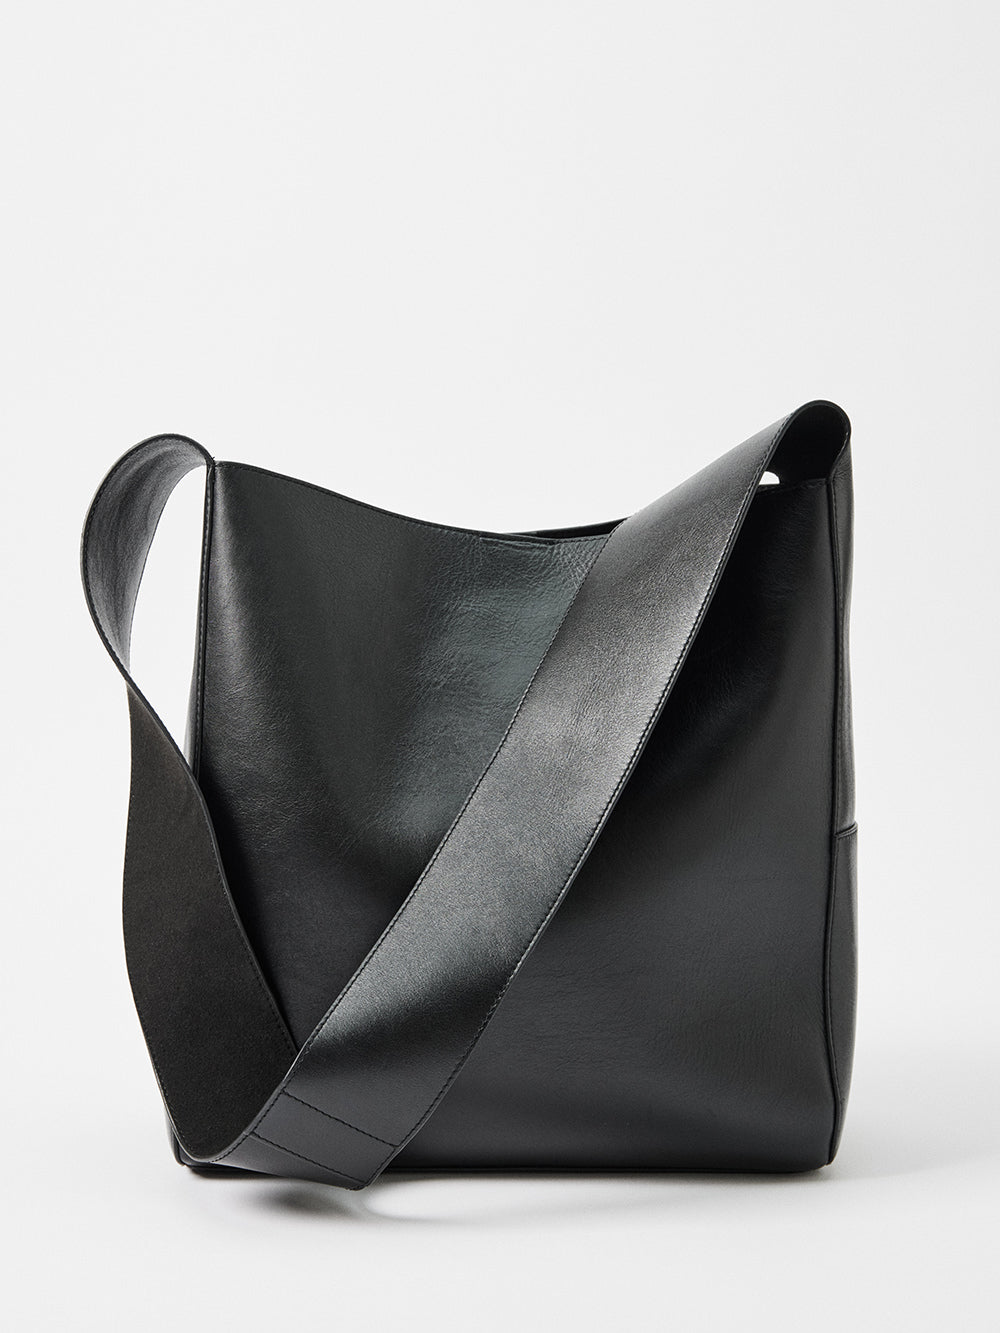 The Colette Leather Hobo